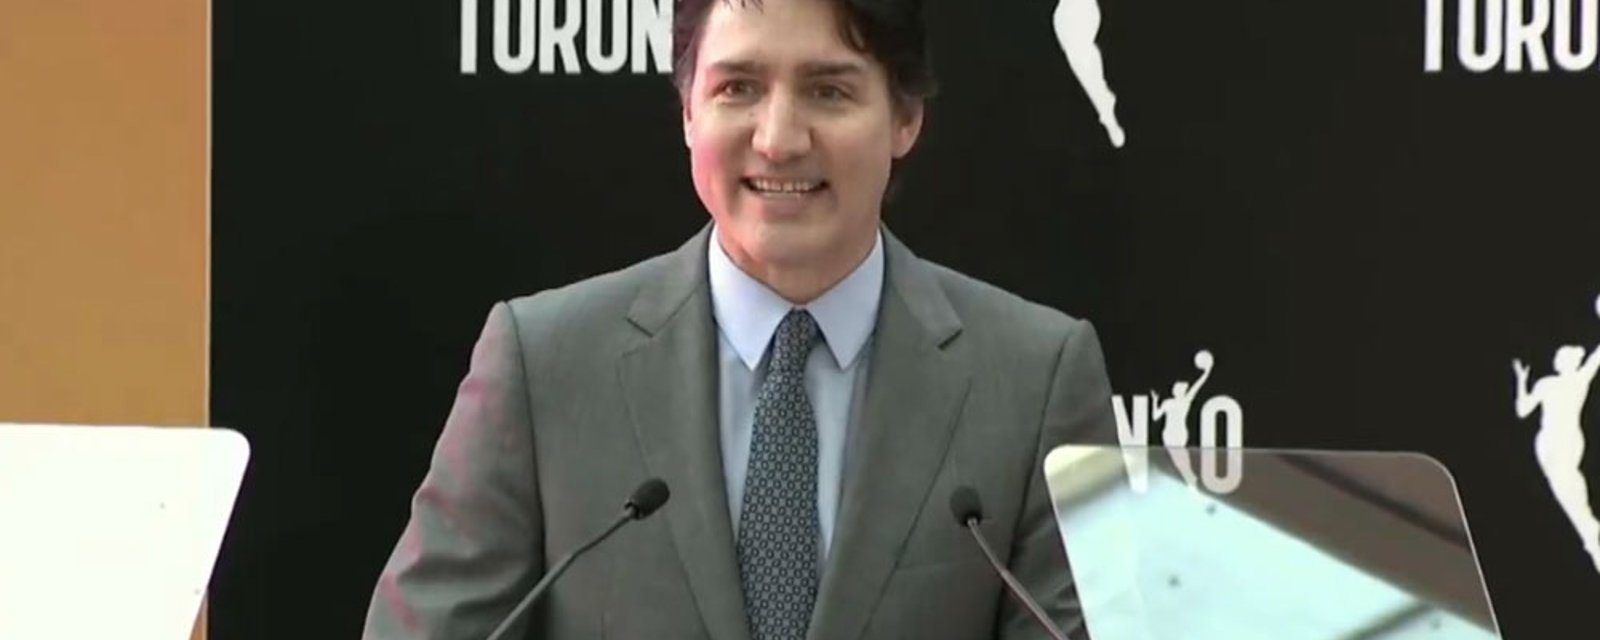 Justin Trudeau roasts Gary Bettman in press conference today